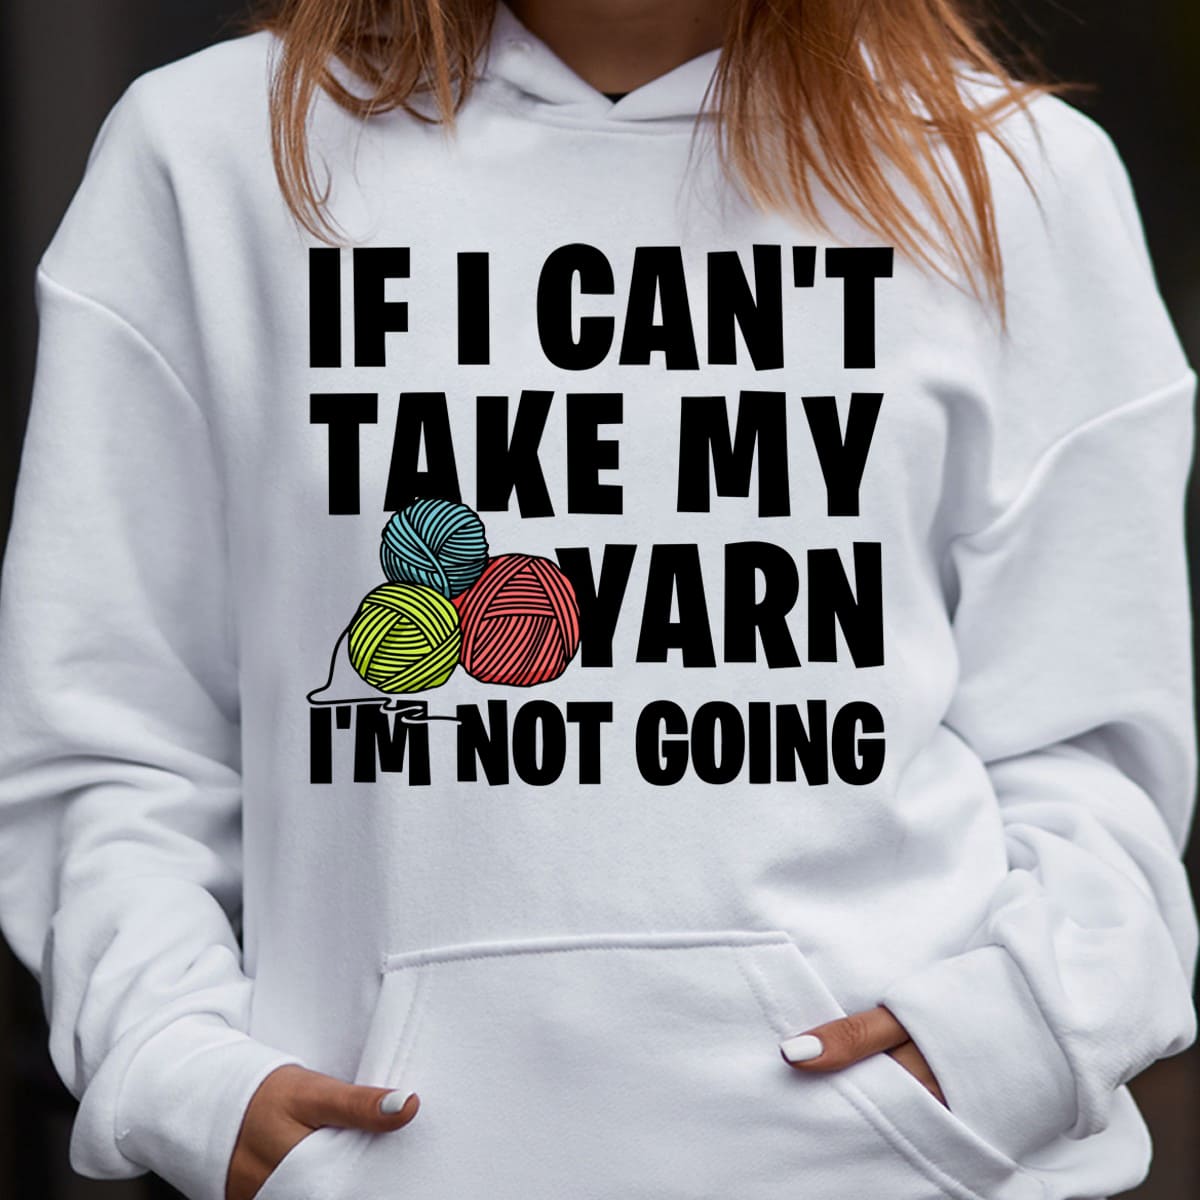 If I can't take my yarn I'm not going - Yarn for sewing, sewing the hobby